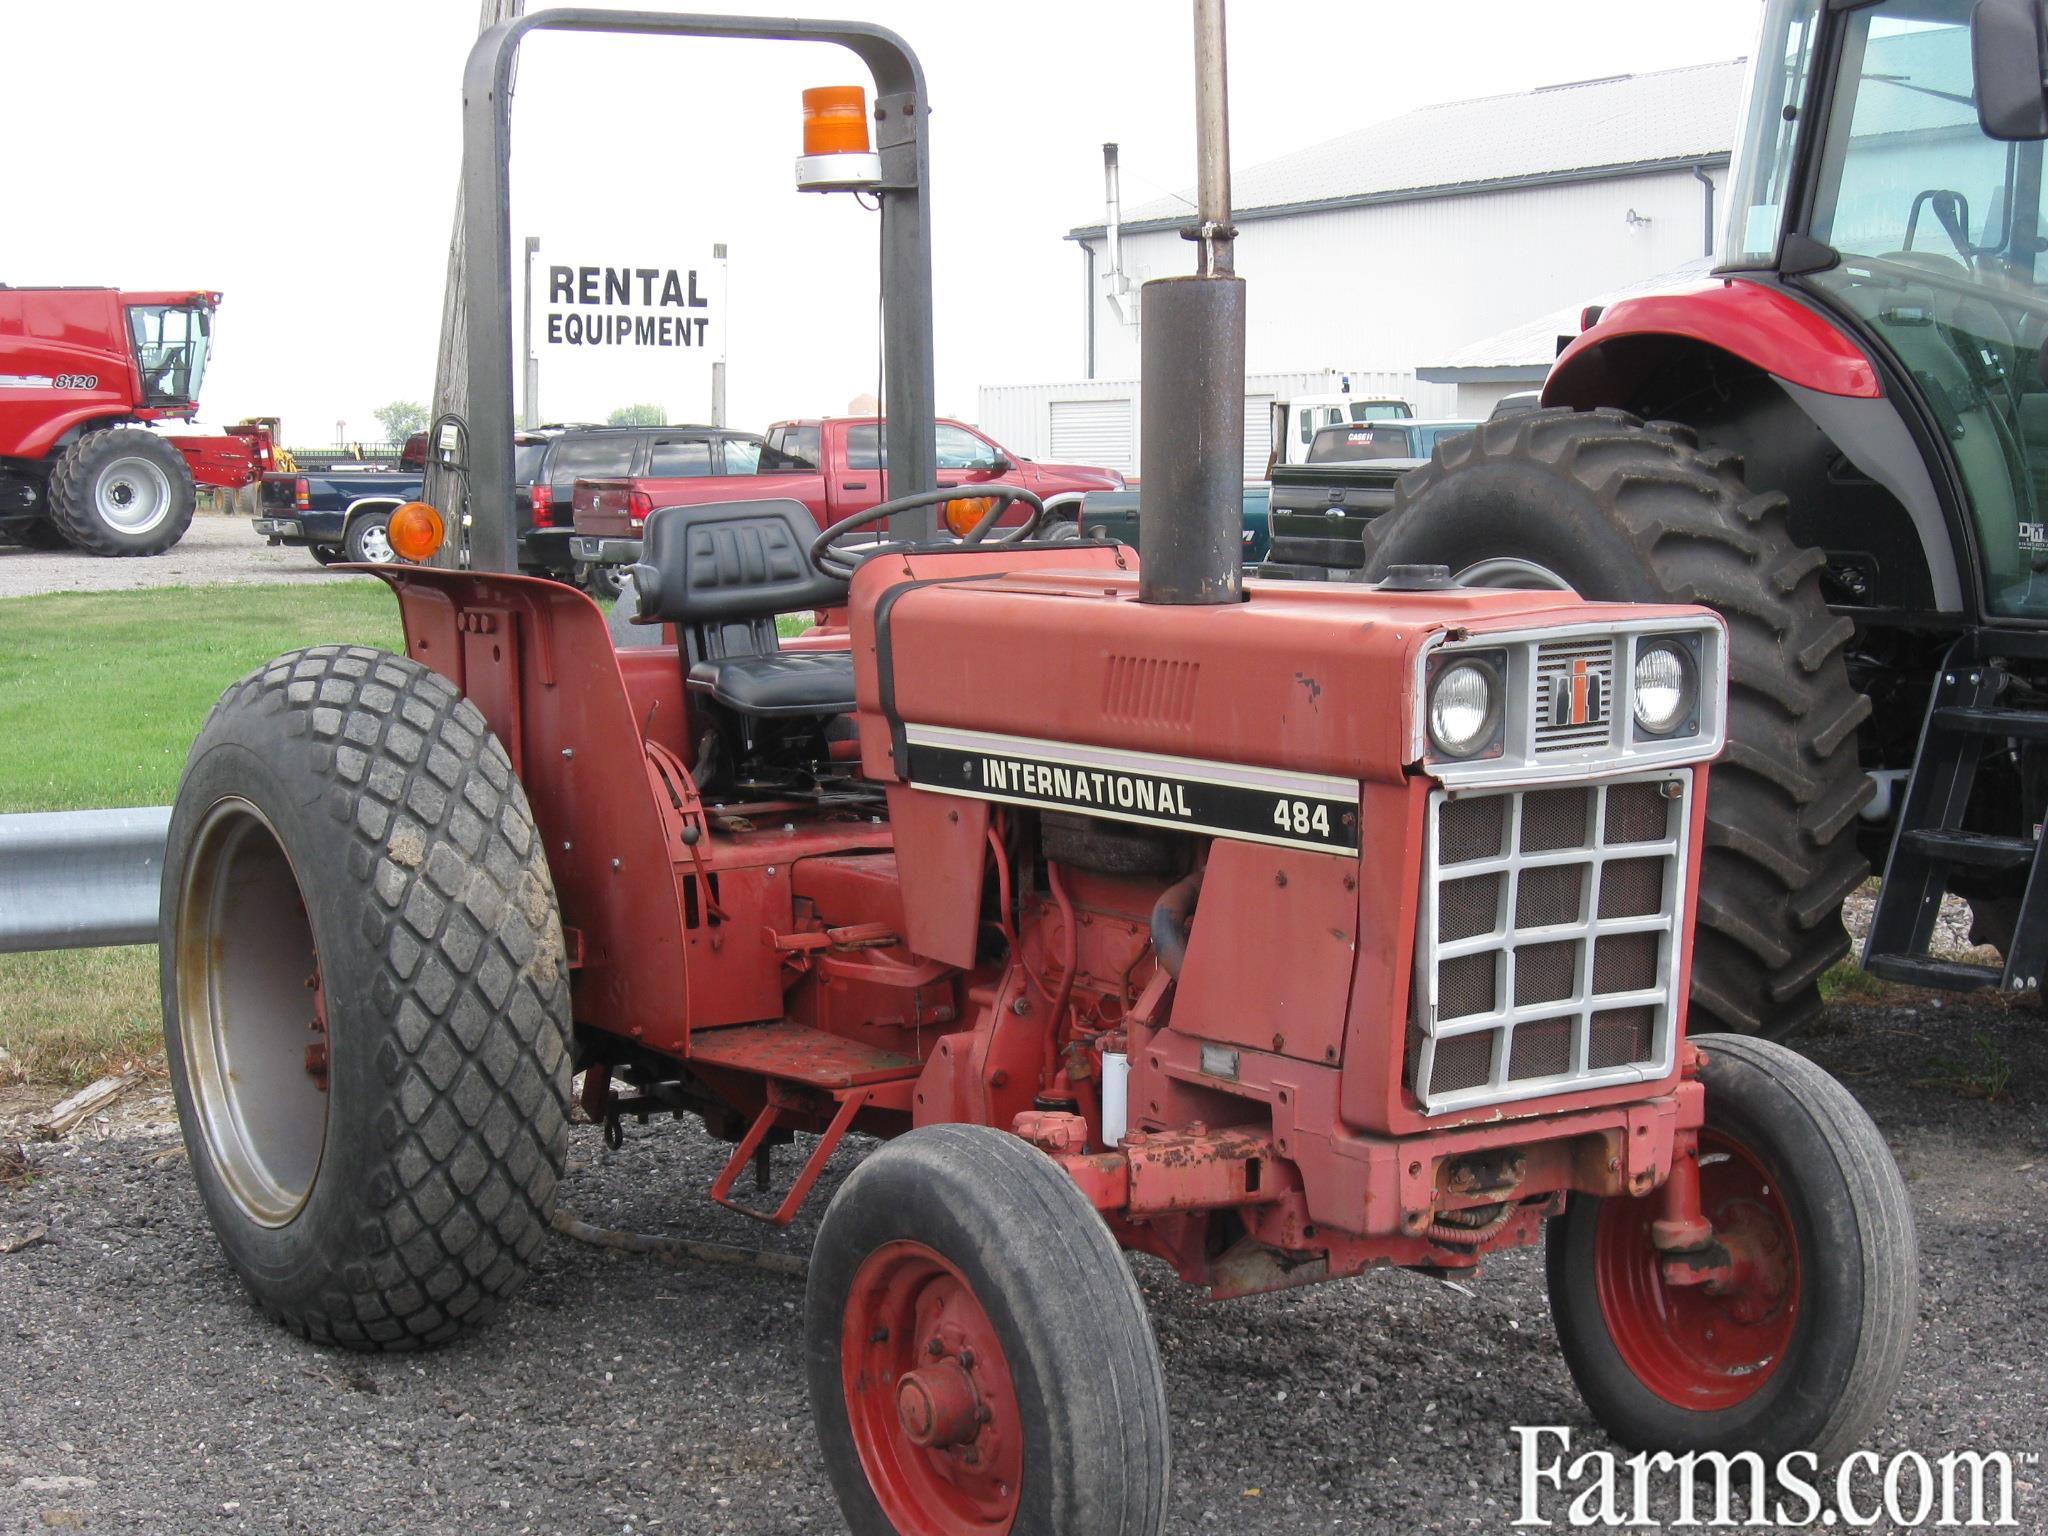 ih-484-tractor-for-sale-farms